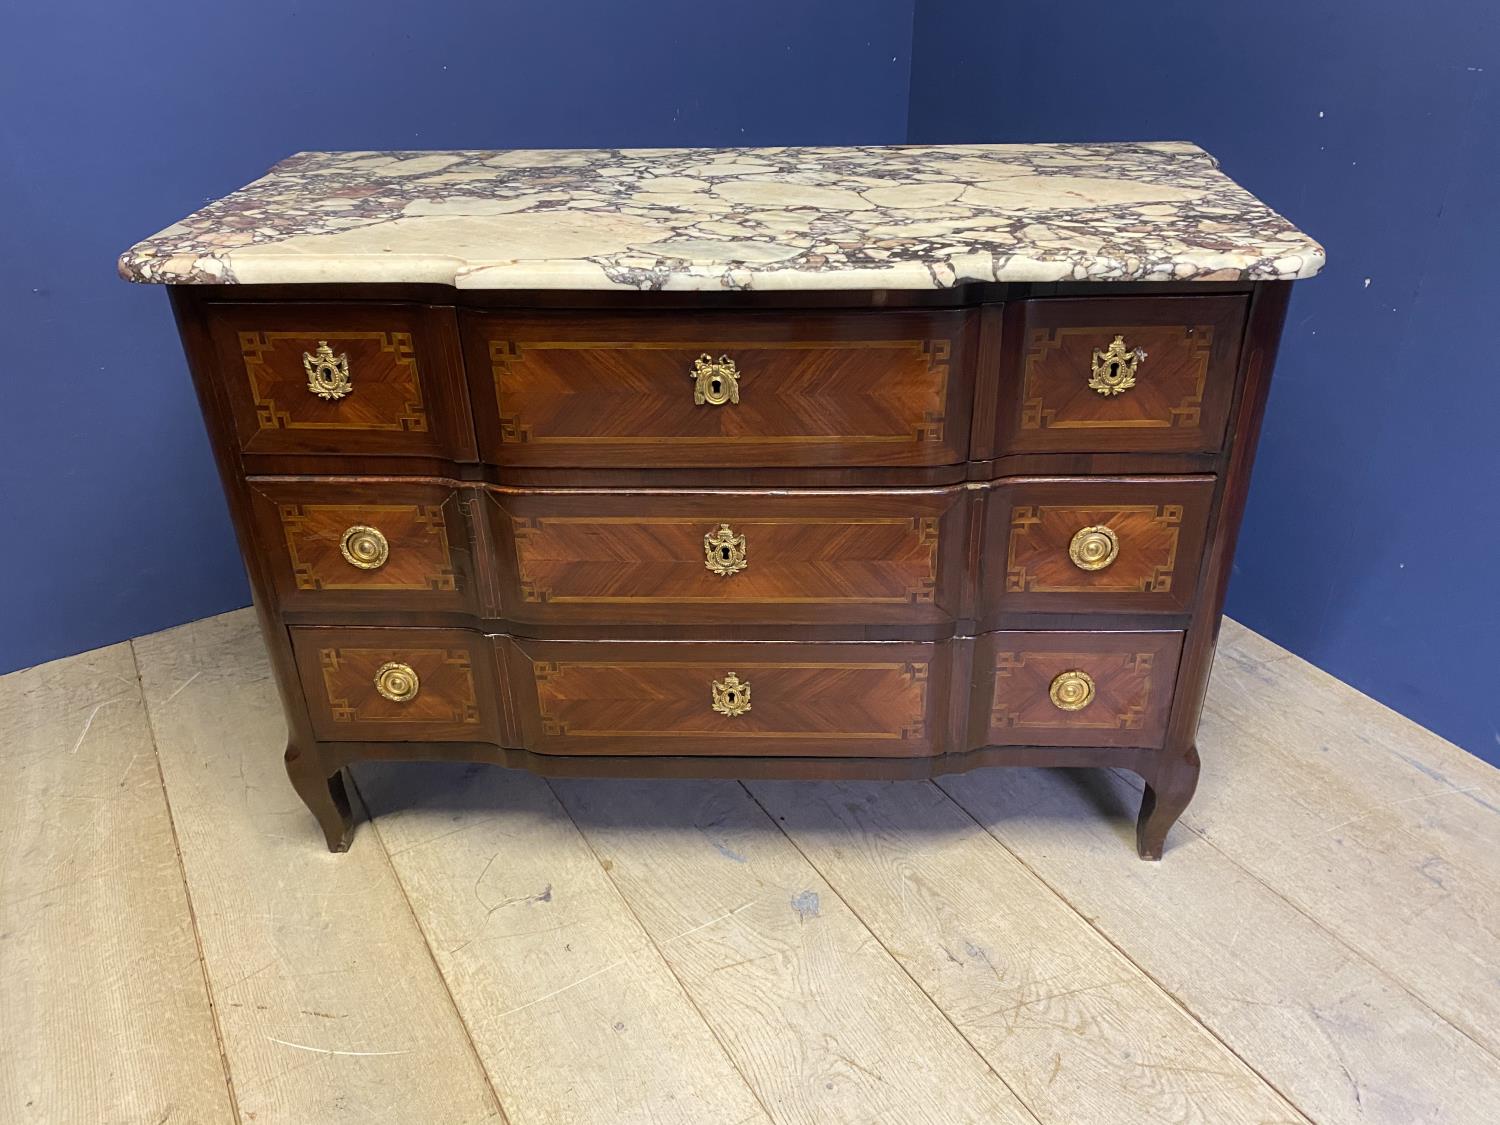 Good C19th Continental breakfront kingwood & inlaid commode of 3 short & 2 long drawers under a